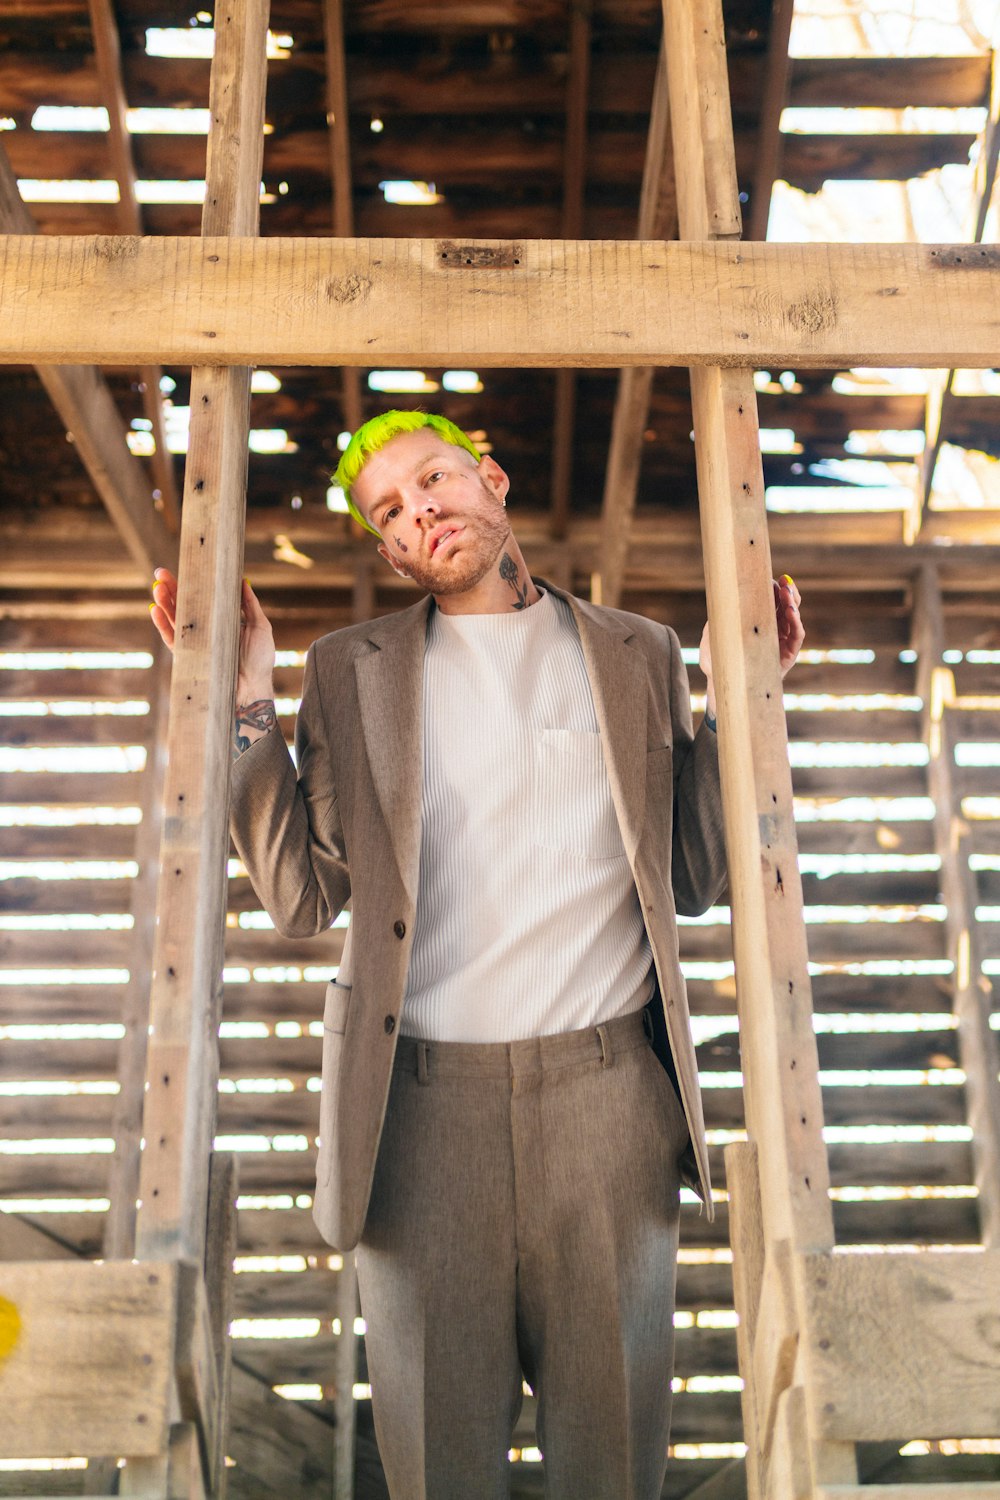 a man in a suit and tie standing under a wooden structure